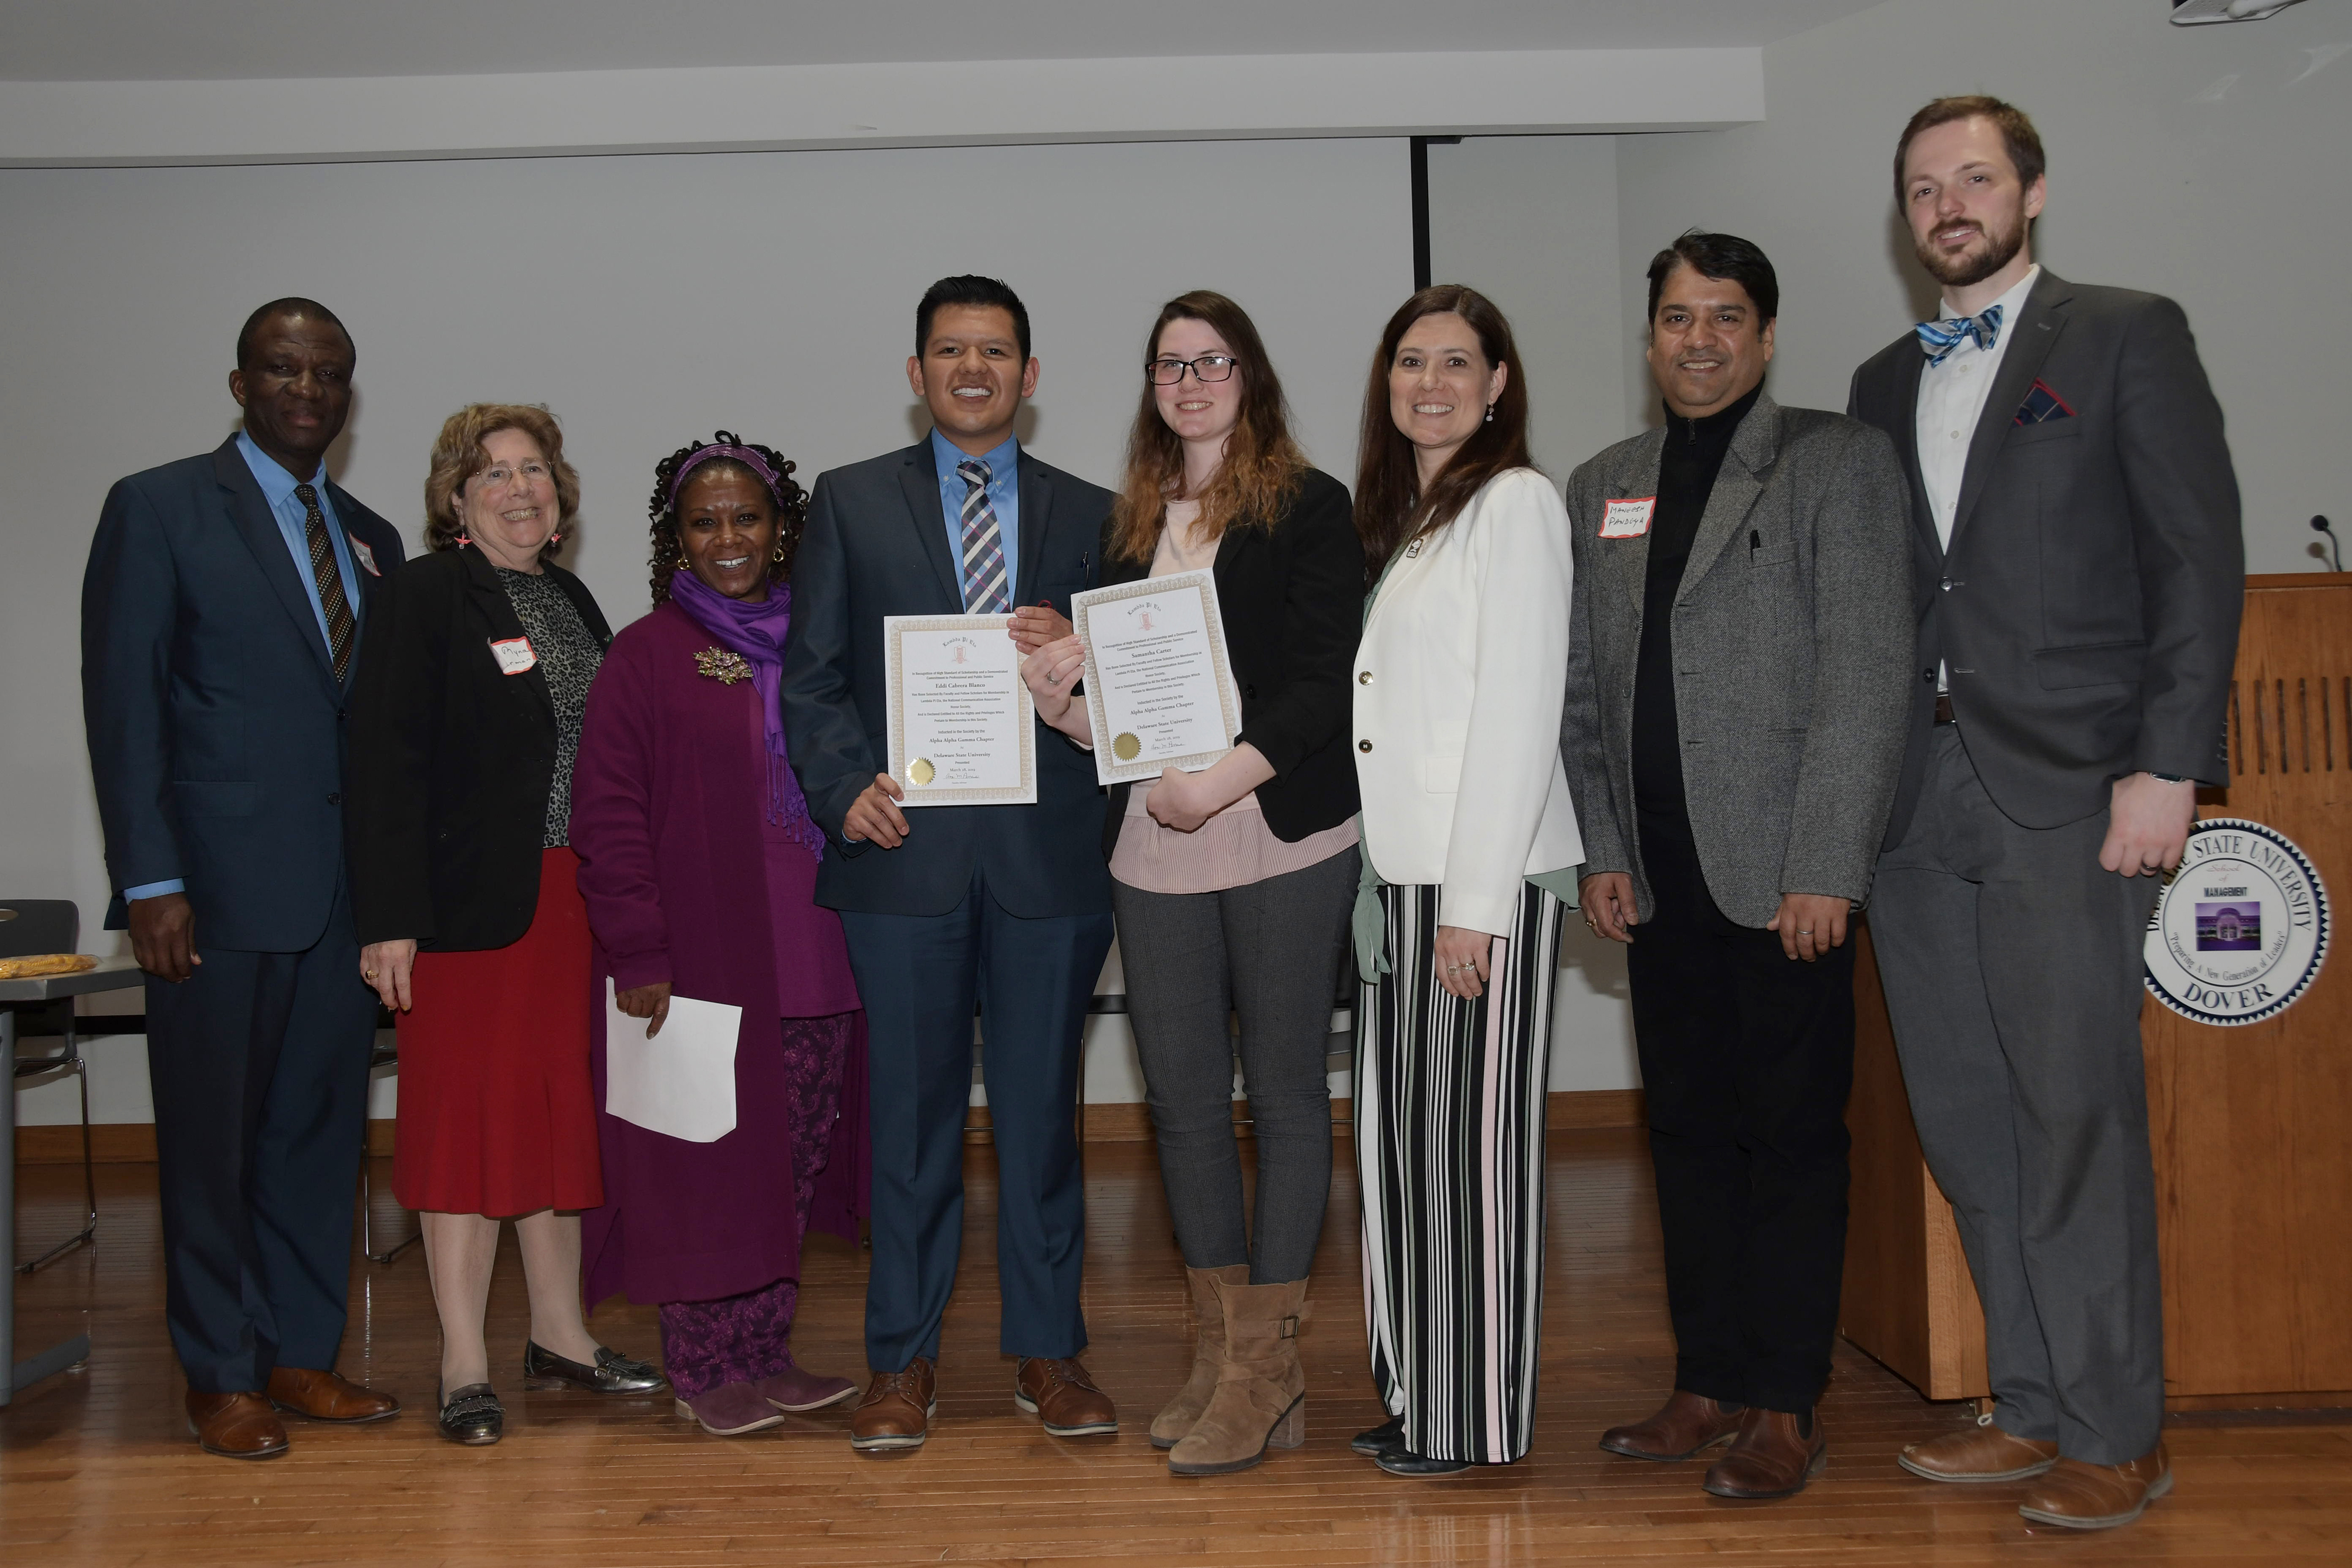 (L-r) Dr. Daniel Awodiya, Dr. Myna German, Ava Perrine, newly inducted Lambda Pi Eta inductees Eddi Cabrera and Samantha Carter, Renee Marine, Maneesh Pandeya and Zak Kimbell. Mr. Cabrera and Ms. Carter were inducted in the honor society during the final session of MCVPA Day.